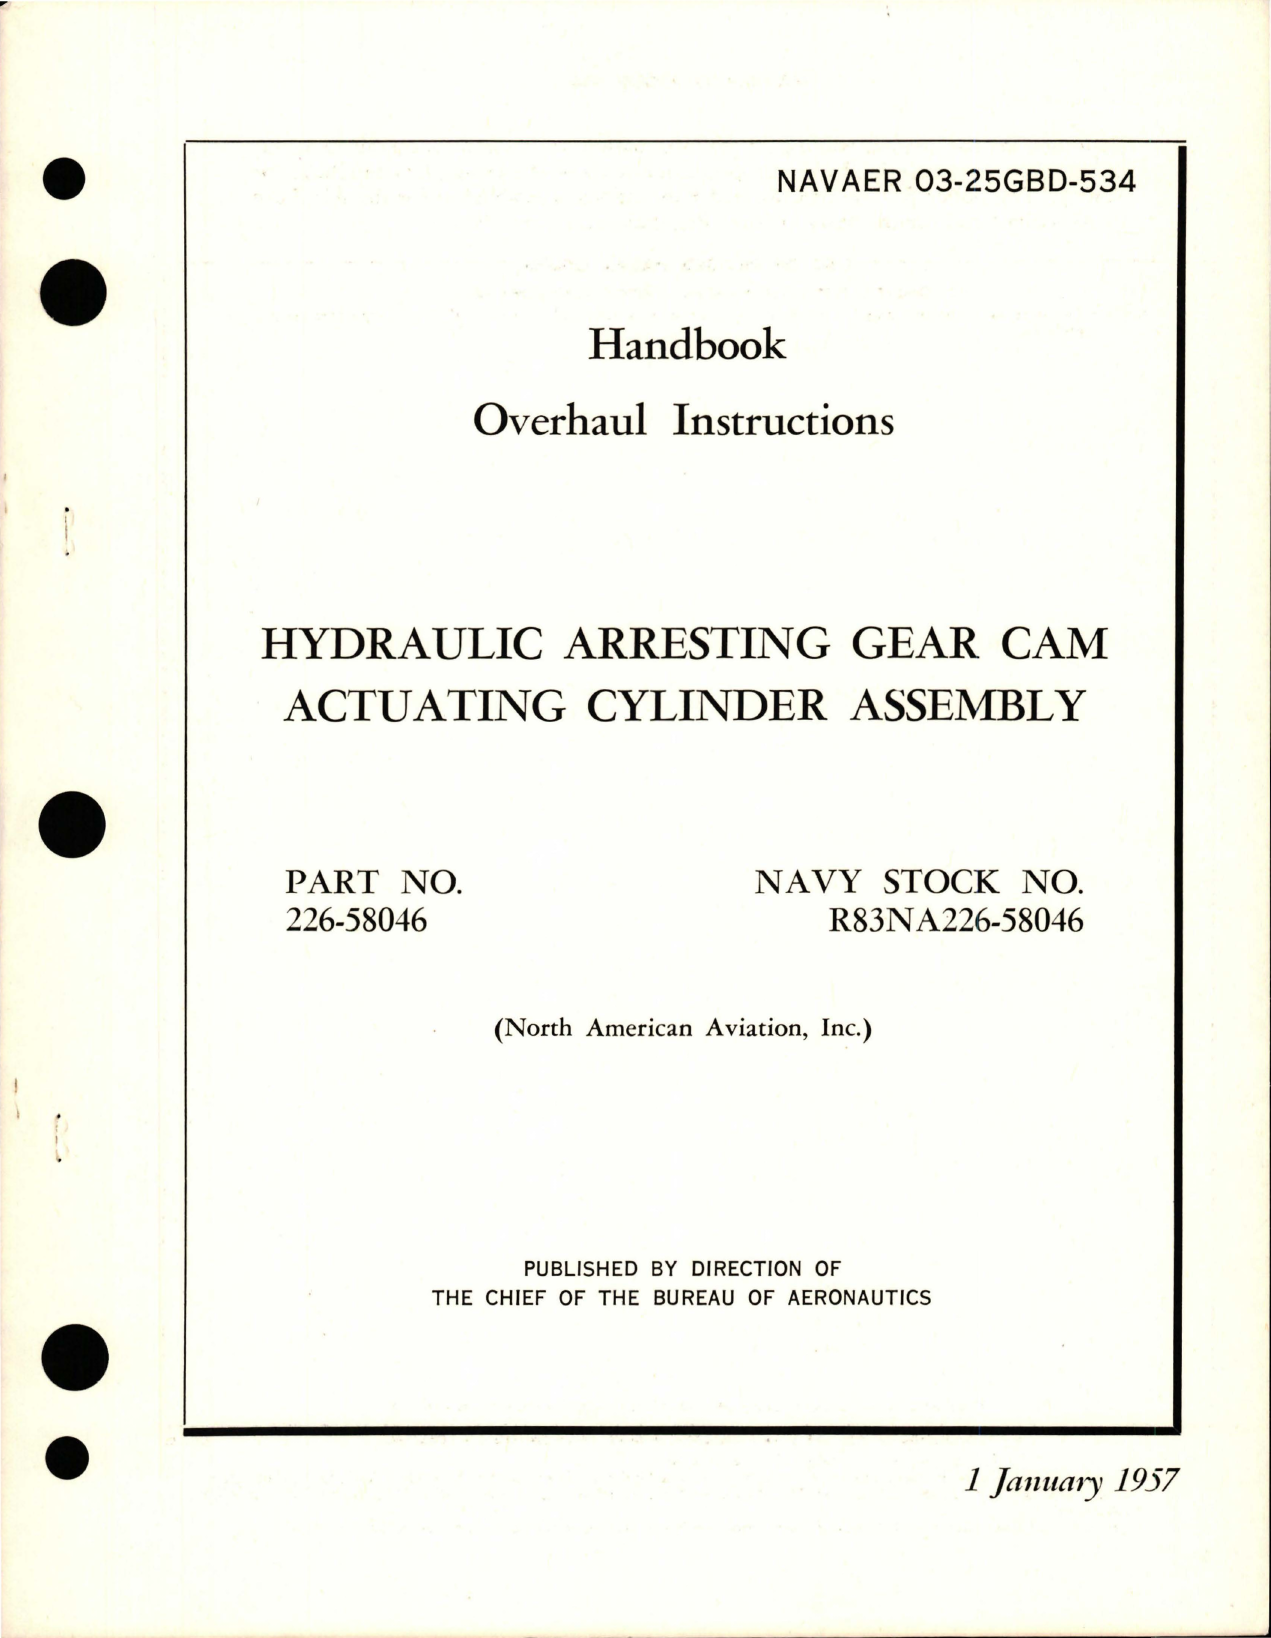 Sample page 1 from AirCorps Library document: Overhaul Instructions for Hydraulic Arresting Gear Cam Actuating Cylinder Assembly - Part 226-58046